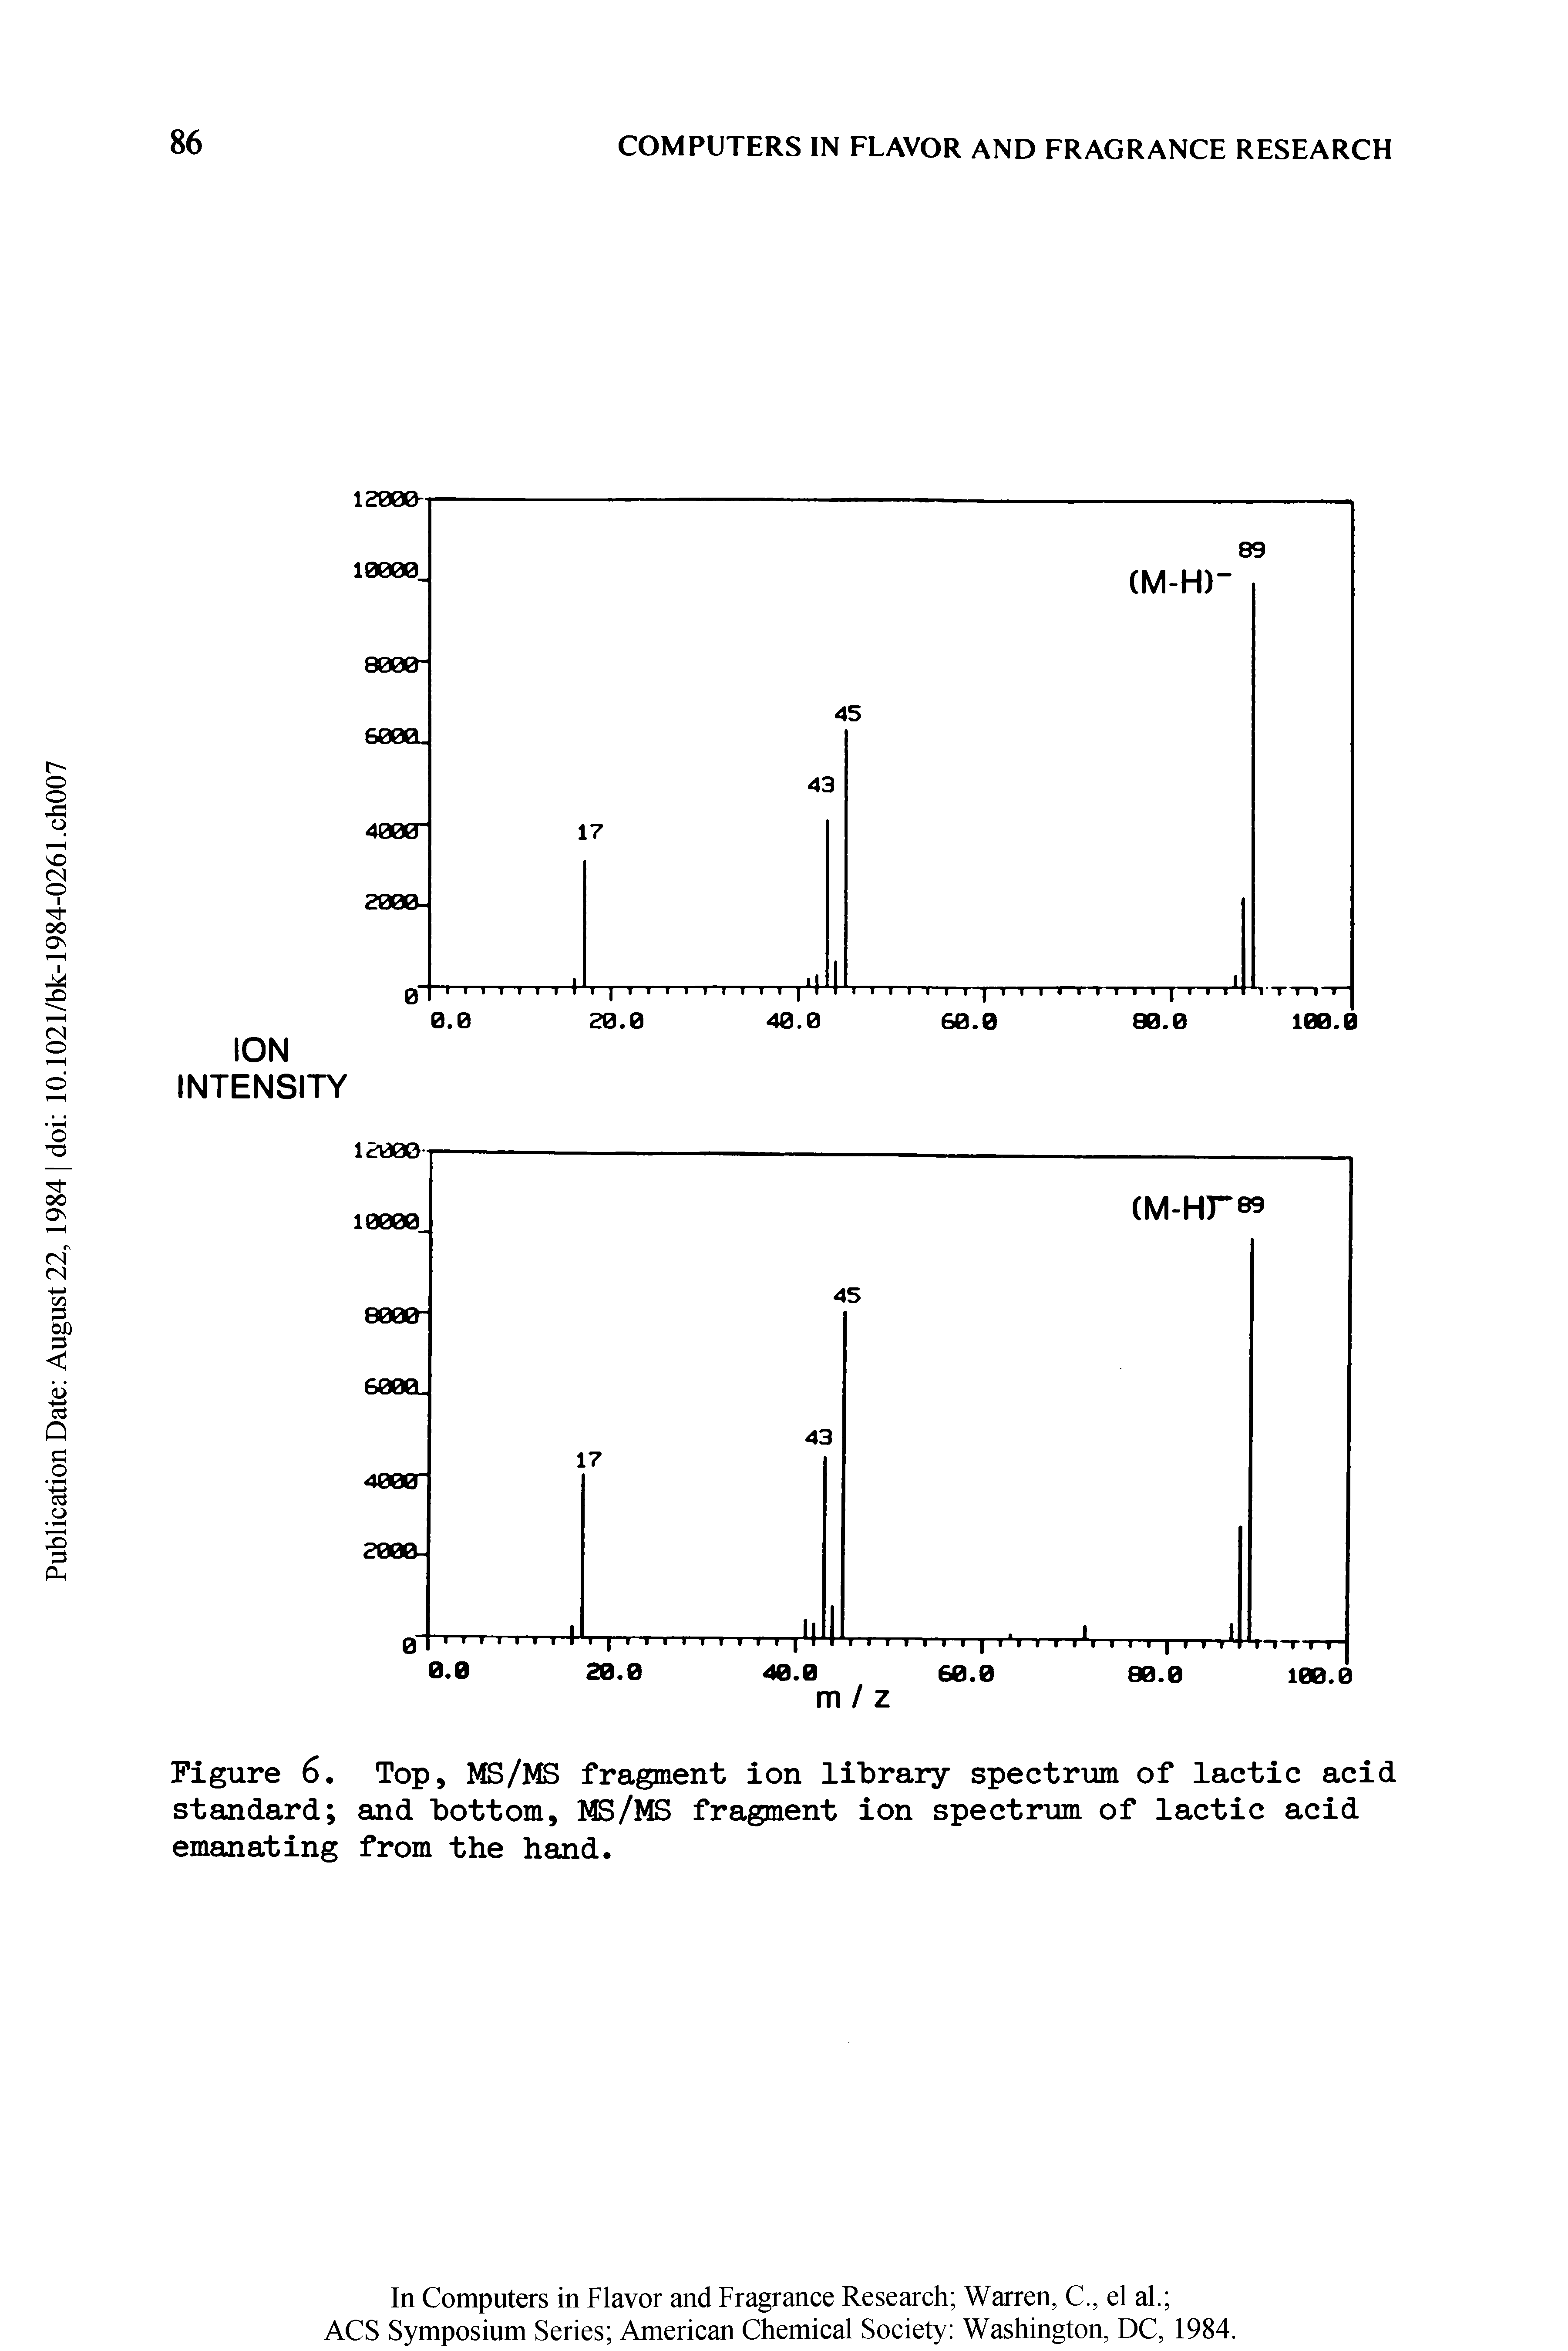 Figure 6. Top, MS/MS fragment ion library spectrum of lactic acid standard and bottom, MS/MS fragment ion spectrum of lactic acid emanating from the hand.